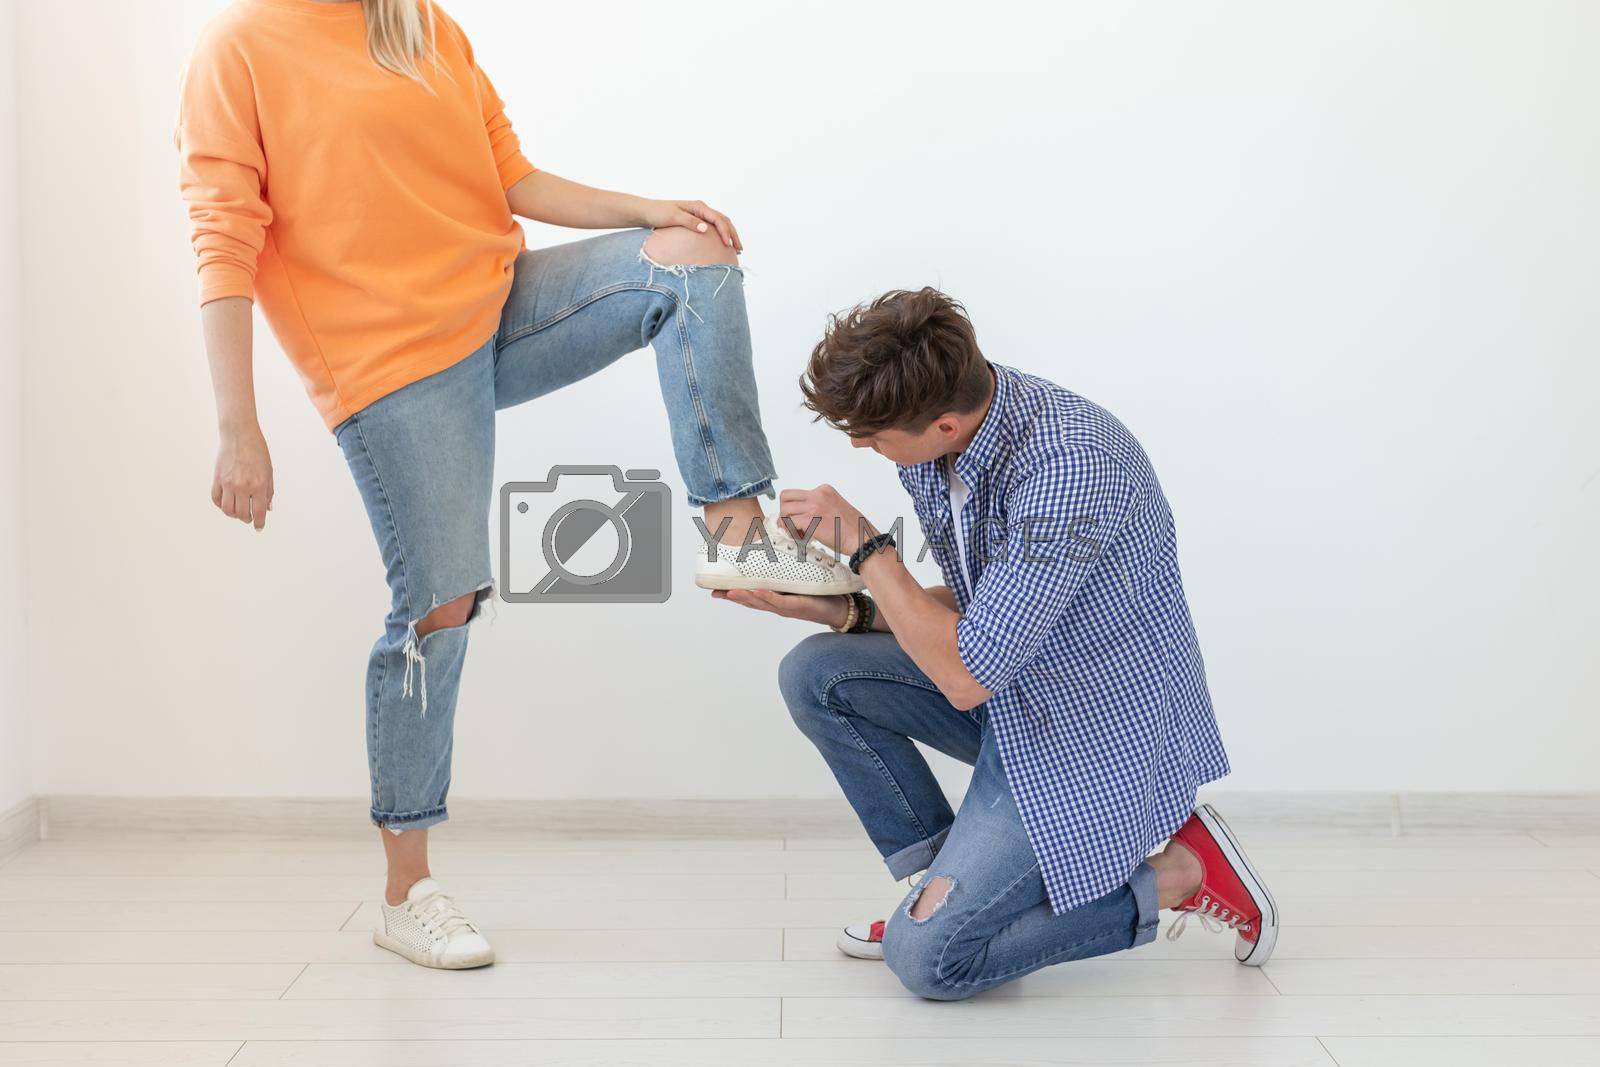 Royalty free image of Young man is kneeling and reverently tying shoelaces to his domineering unidentified woman posing on a white background. Concept of dominant relationships. by Satura86